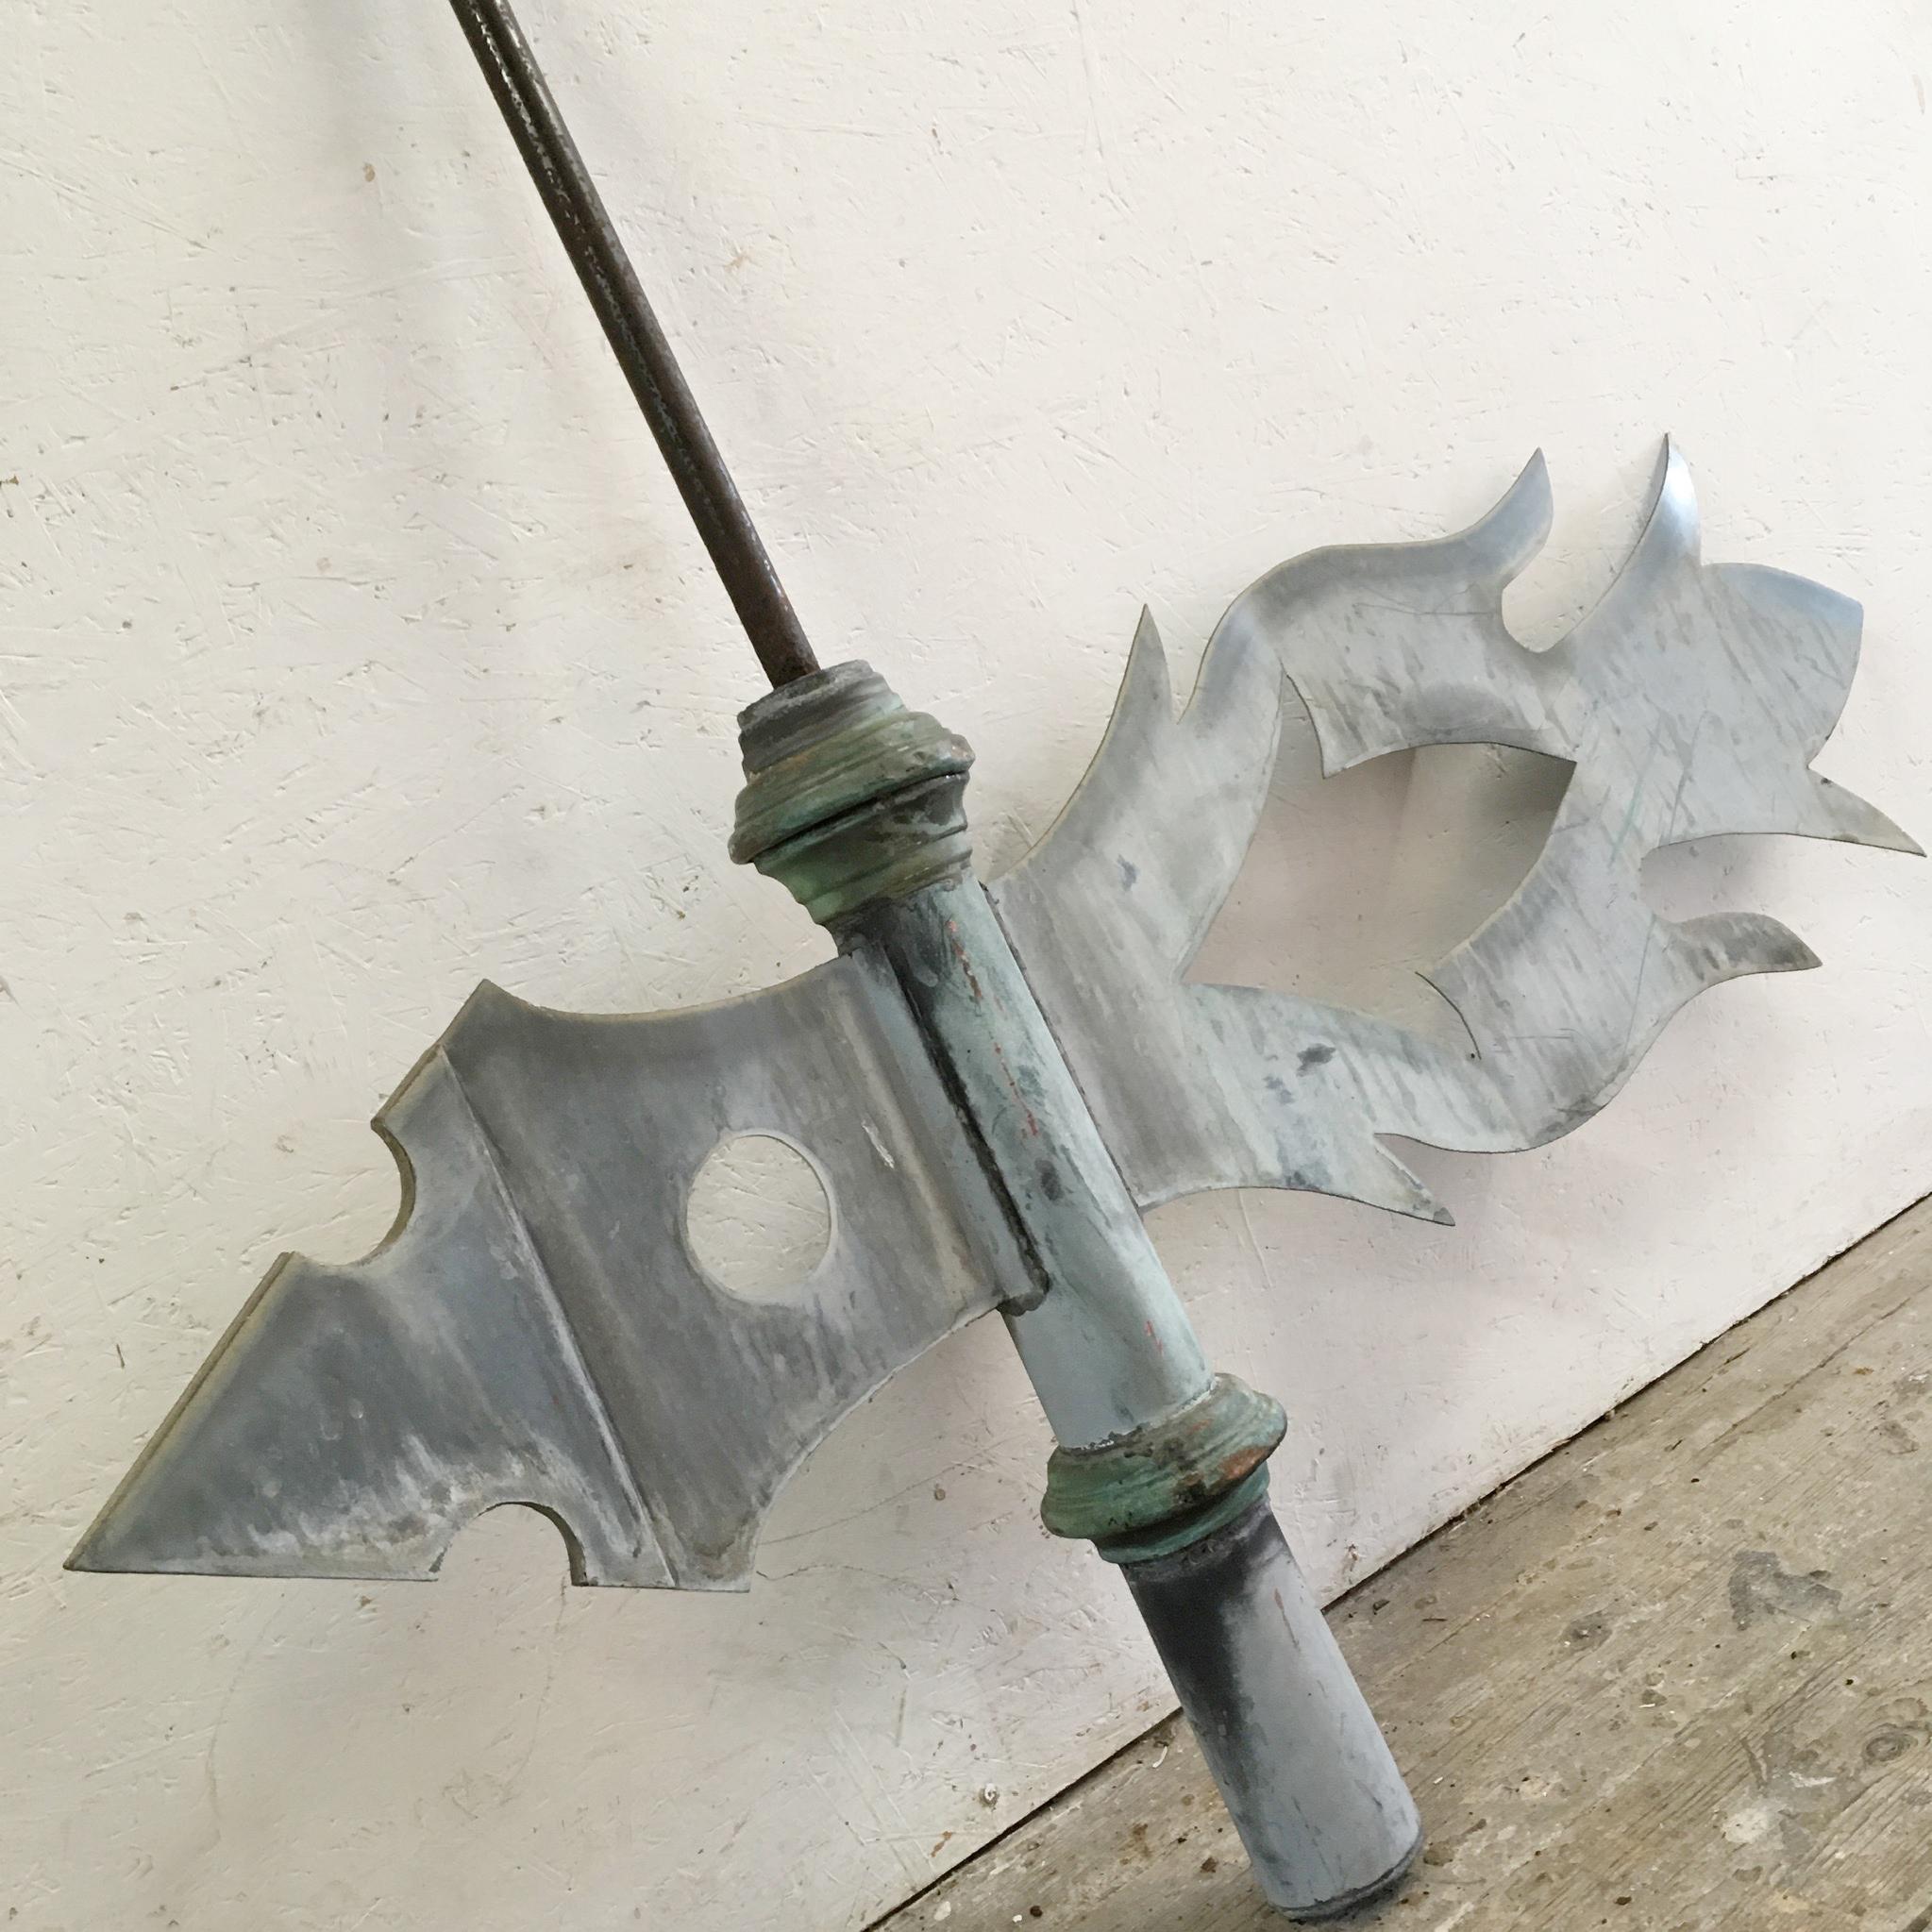 19th century French weather vane
Flame shaped
Large size/heavy item from a Chateau or grand French house

Measures: 130cm width
120cm height
14cm depth.